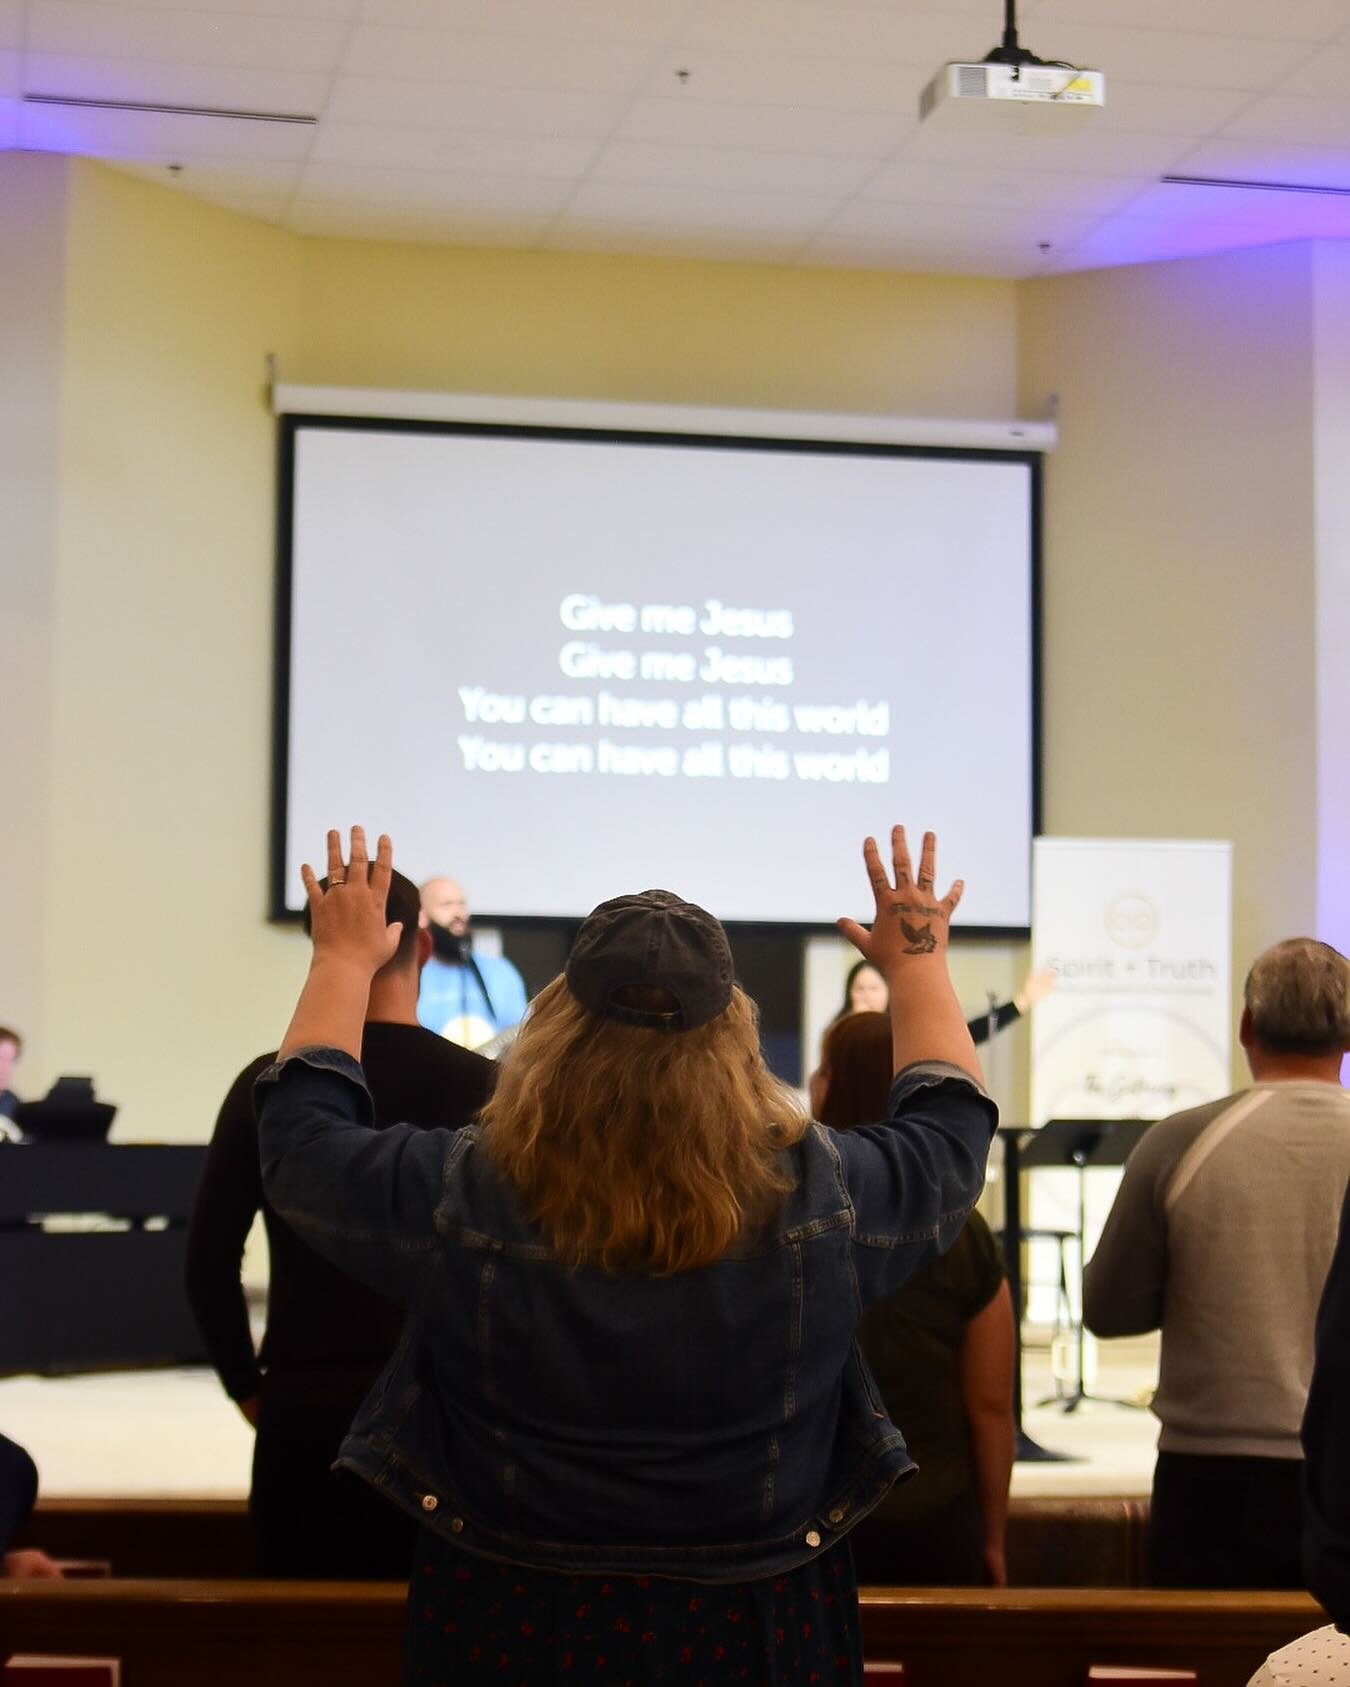 Come worship Jesus with us tomorrow! 🕊️
.
.
10am at 320 w. Trilby rd.